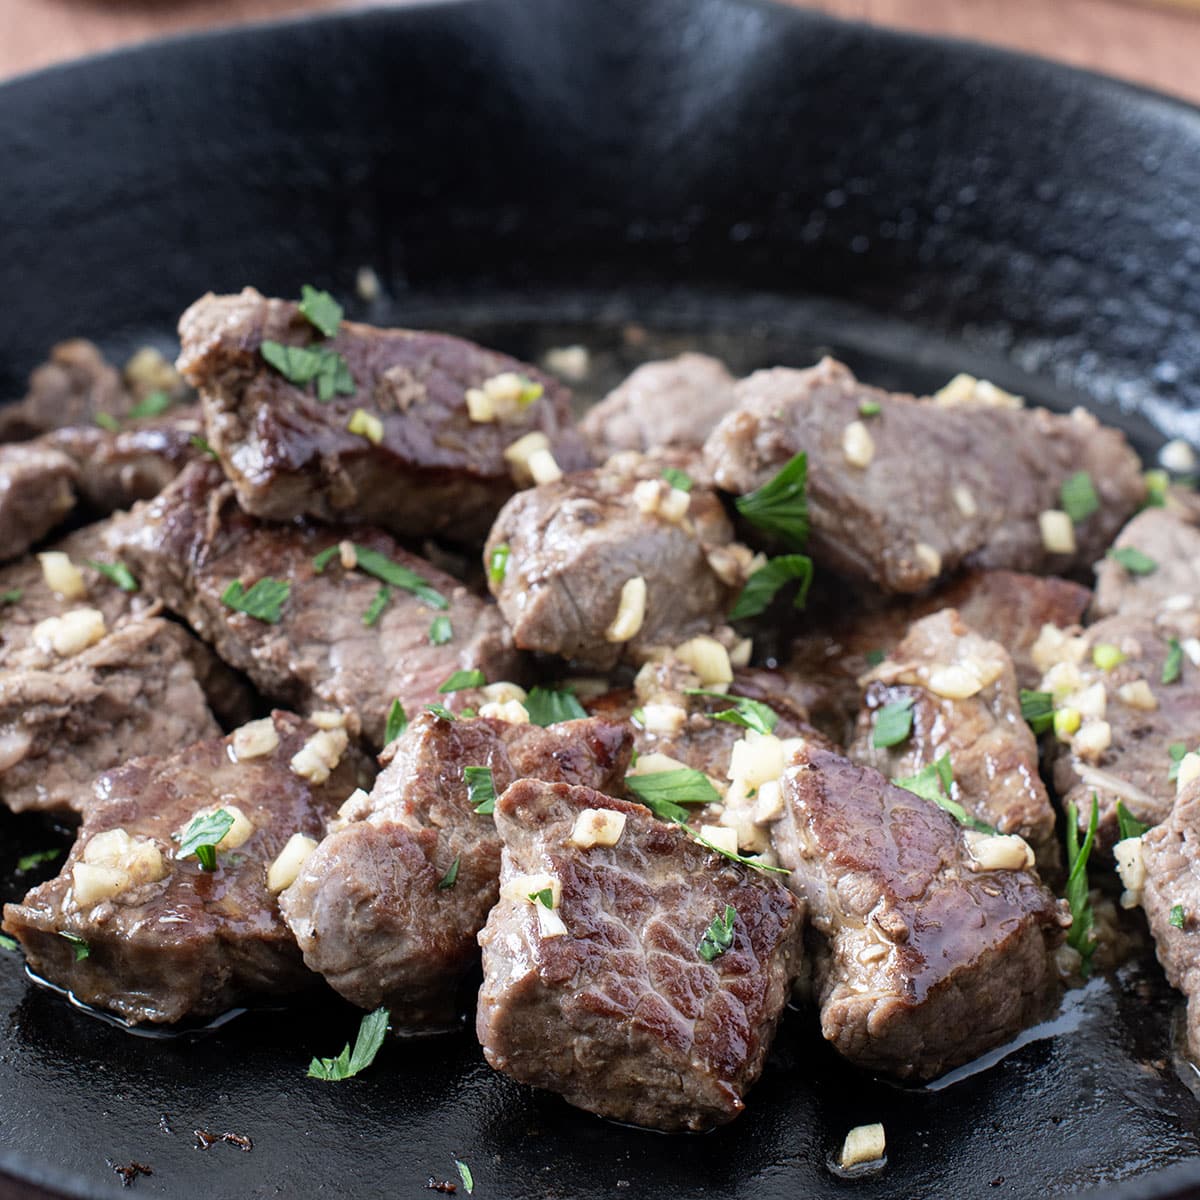 Steak Tips with garlic butter in a cast iron skillet.